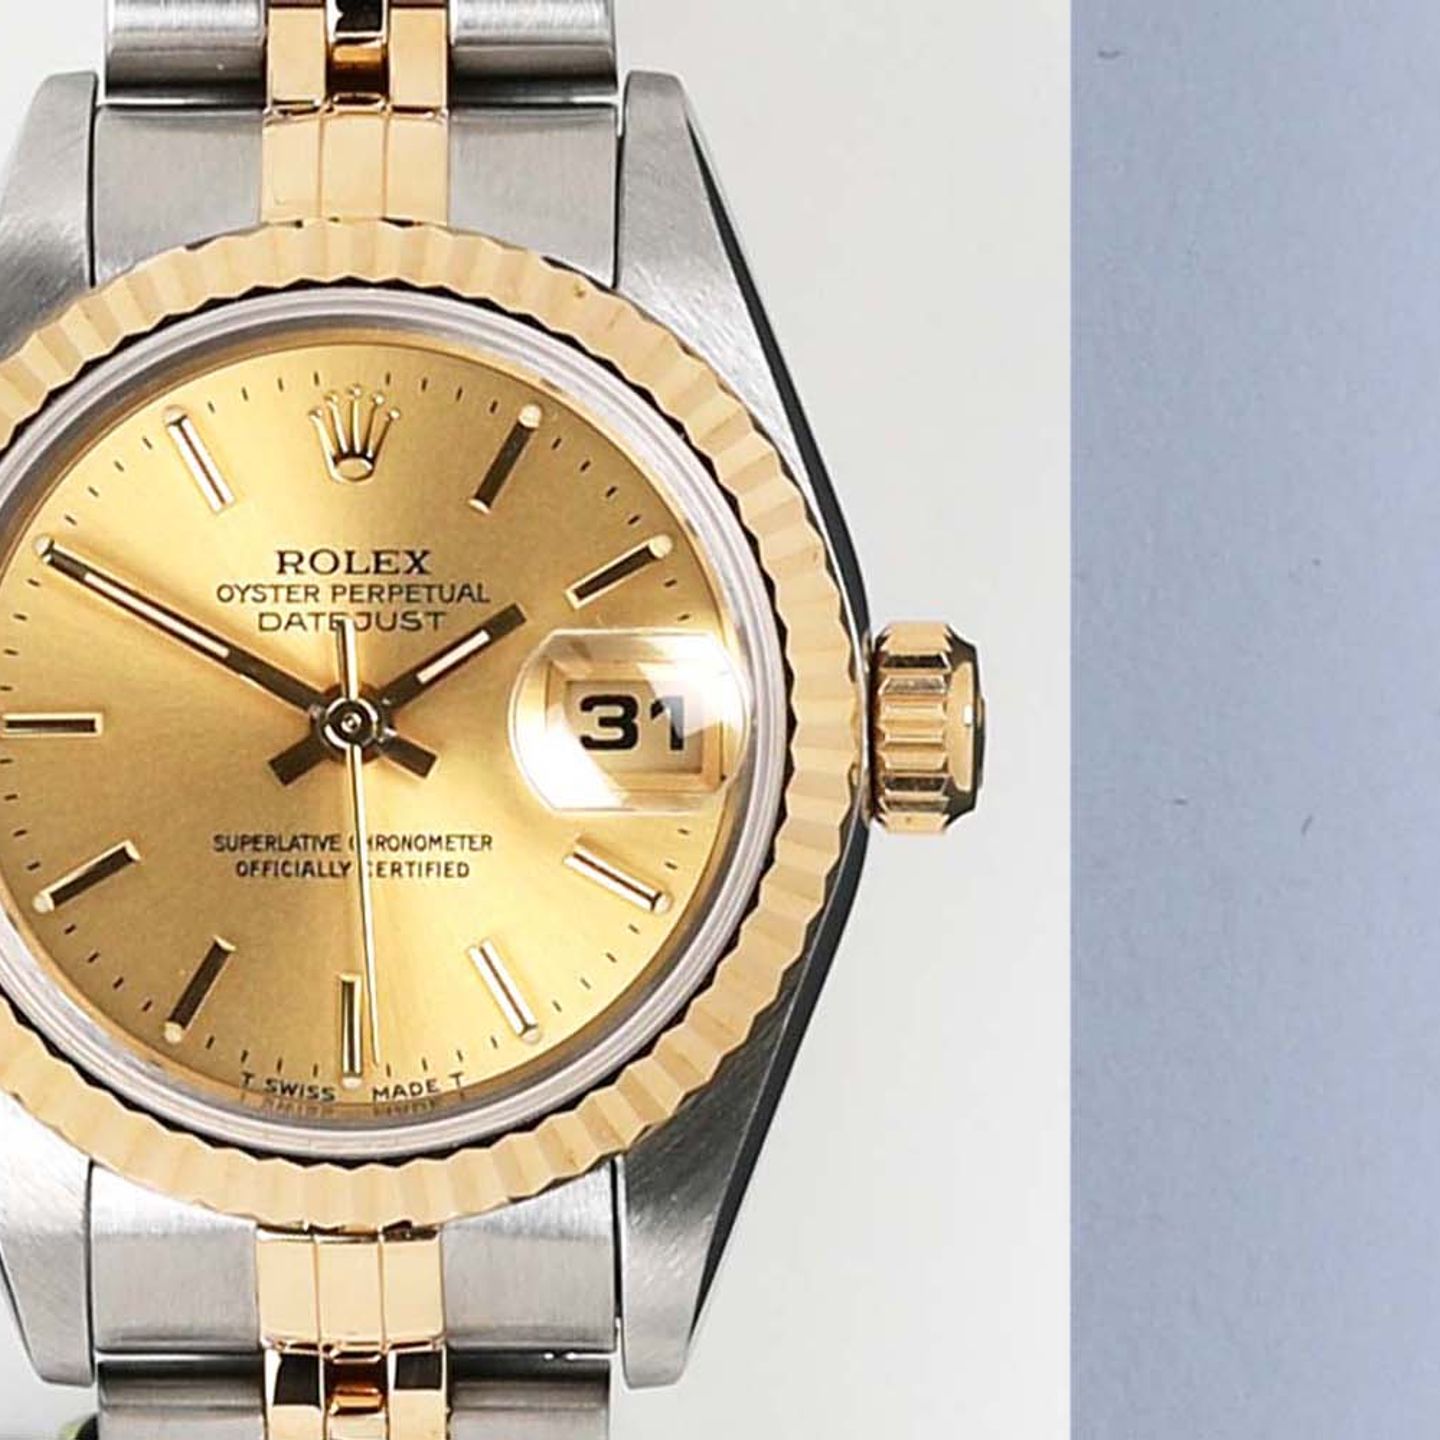 Rolex Lady-Datejust 69173 (1997) - Champagne dial 26 mm Gold/Steel case (5/8)